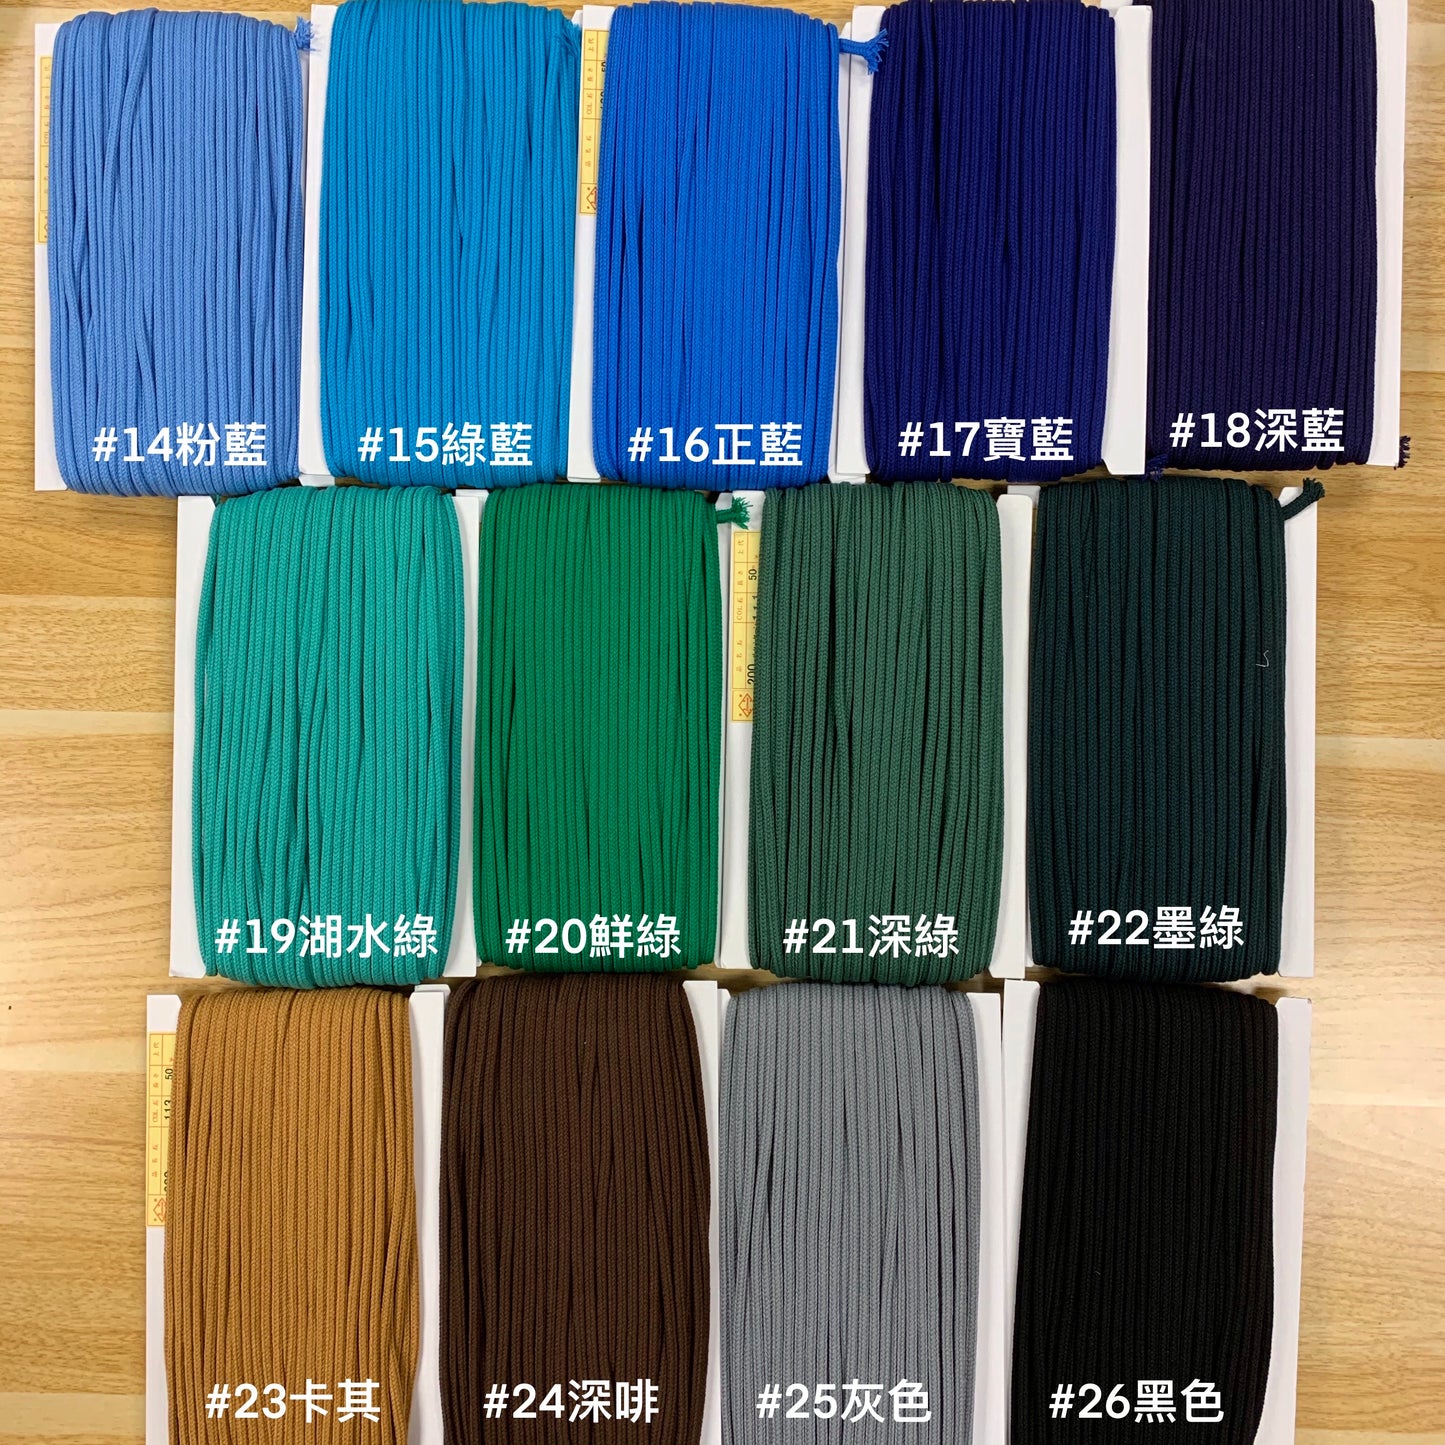 5mm cotton rope 棉繩 - 26 colors